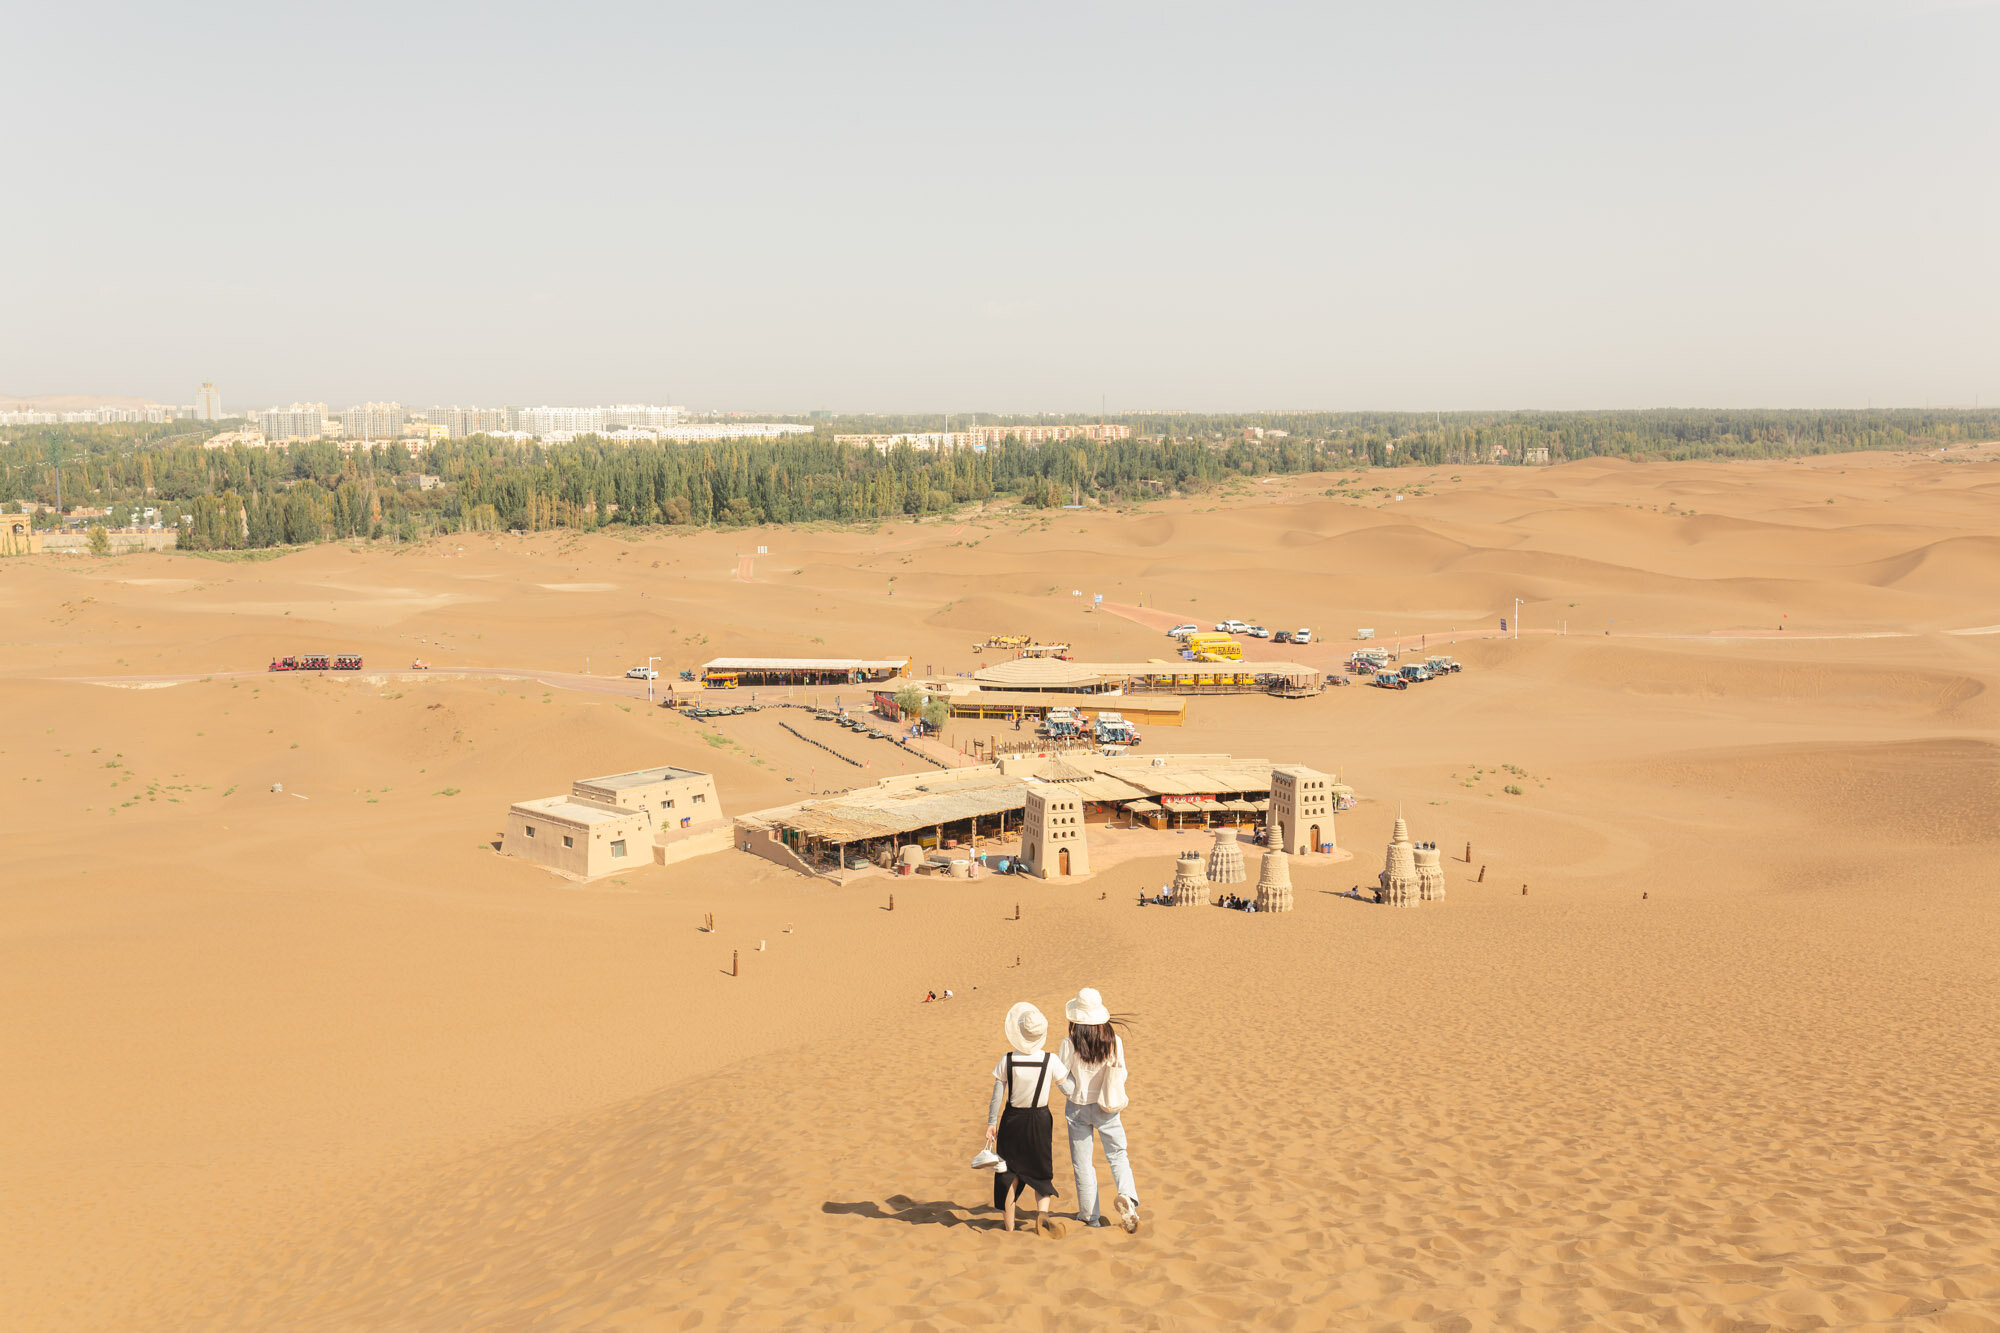  September 28th 2019. Shanshan County, Xinjiang province, China. On the site of the Kumtag Desert Scenic Area, a desert-tourism park catering mostly to Han-Chinese tourists. 